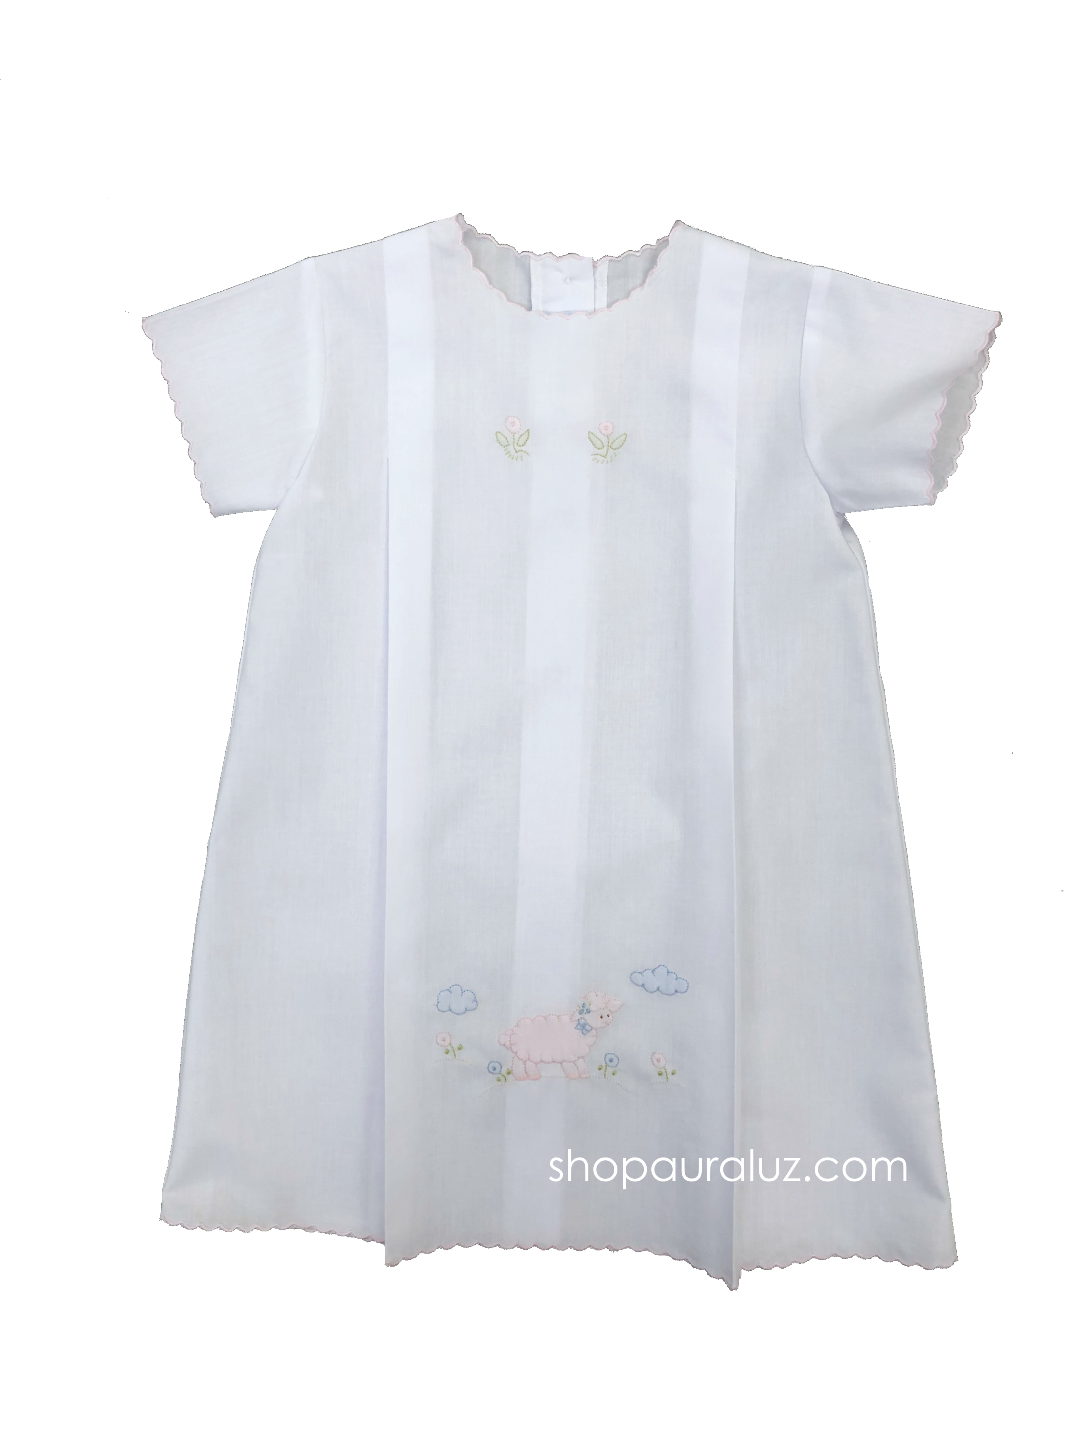 Auraluz Day Gown...White with pink embroidered lamb